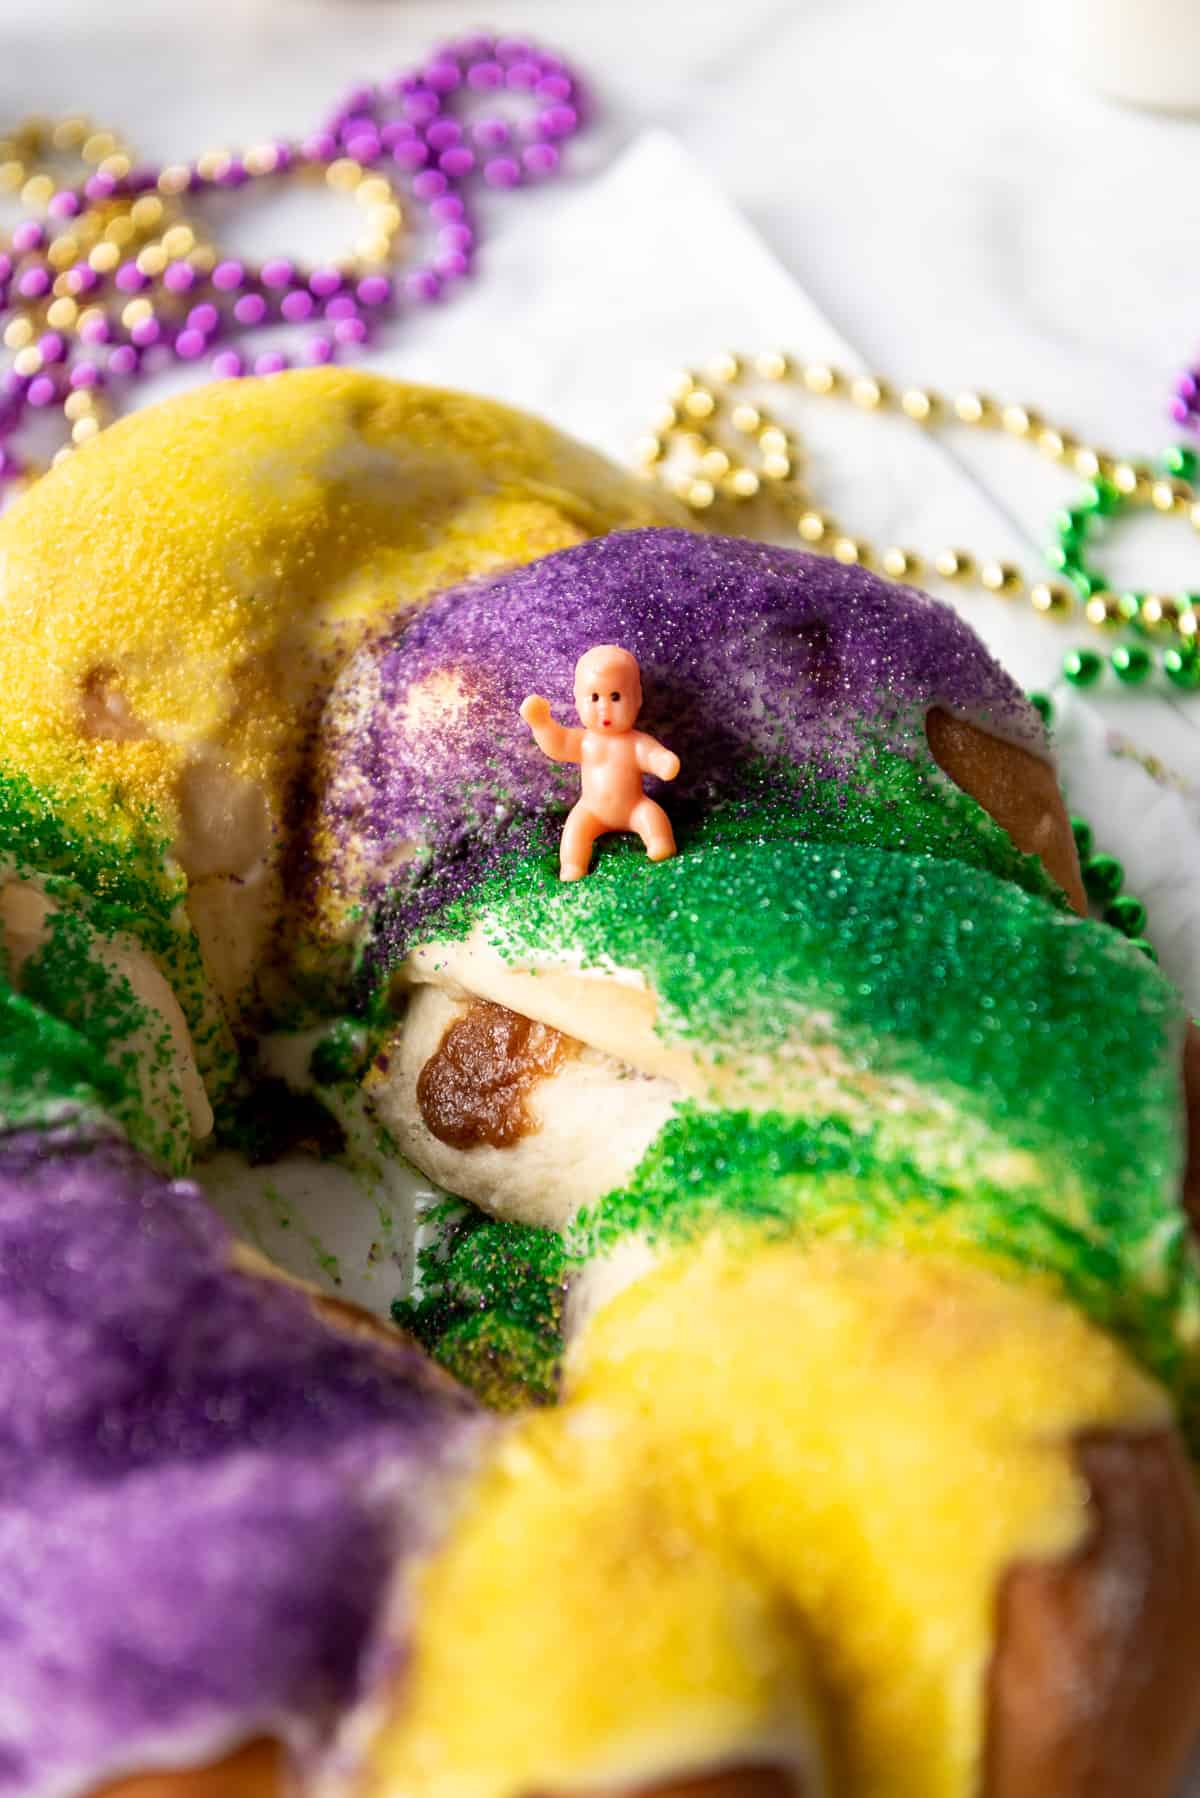 A miniature plastic toy baby on top of a king cake.